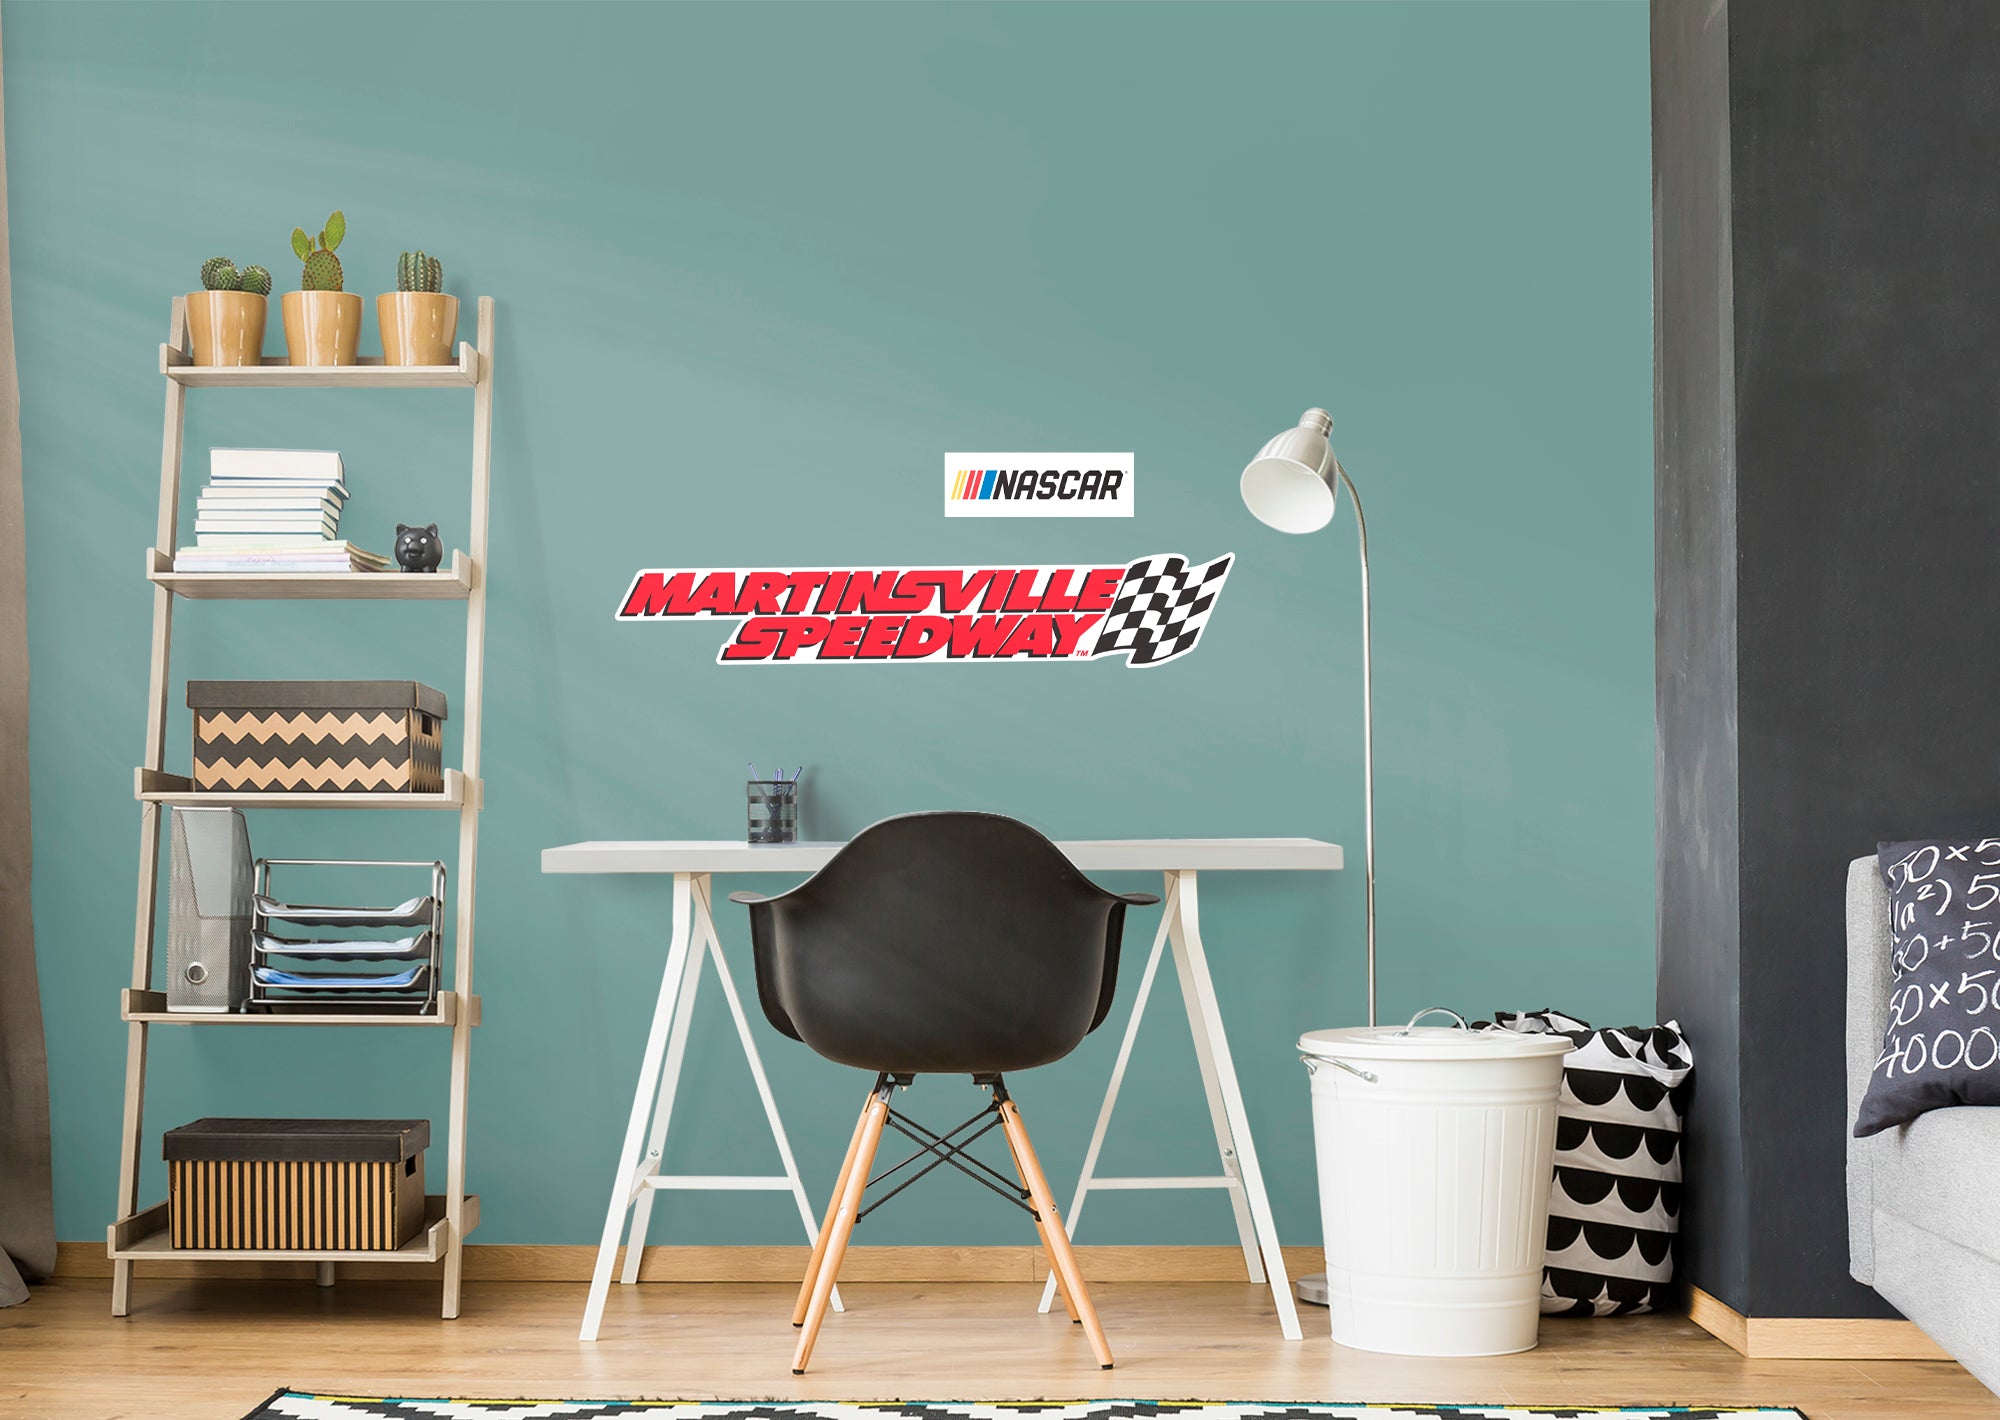 Martinsville Speedway 2021 Logo - Officially Licensed NASCAR Removable Wall Decal XL by Fathead | Vinyl